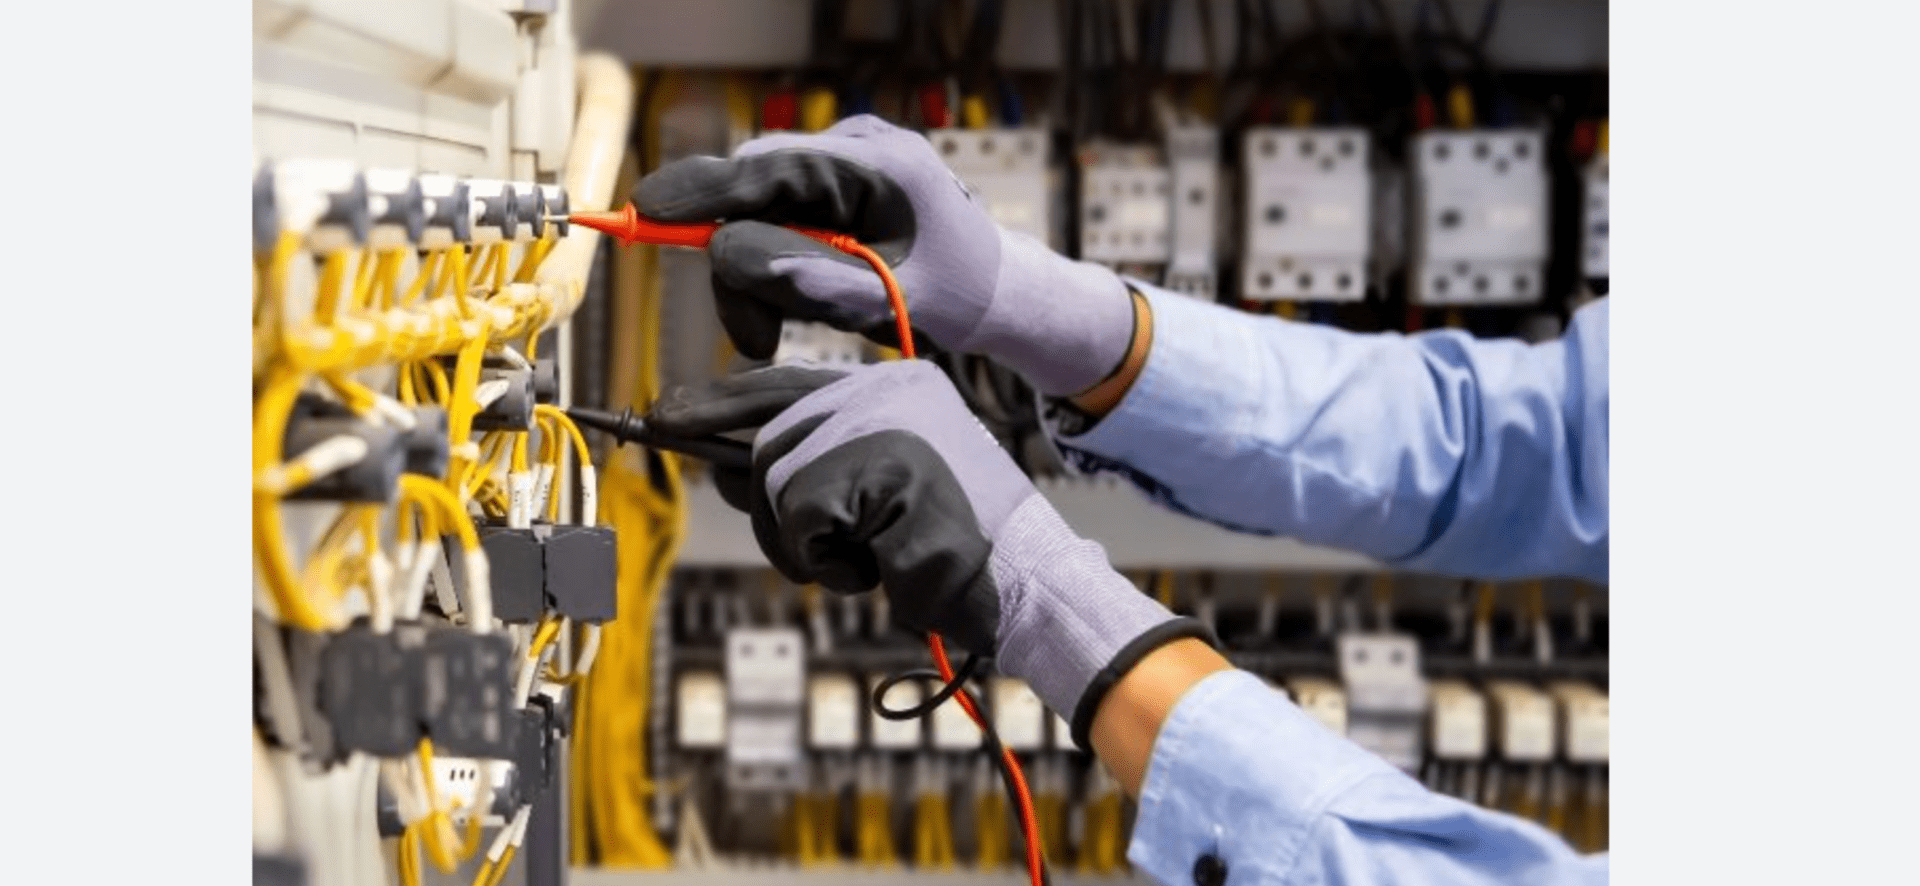 A person wearing gloves and holding wires